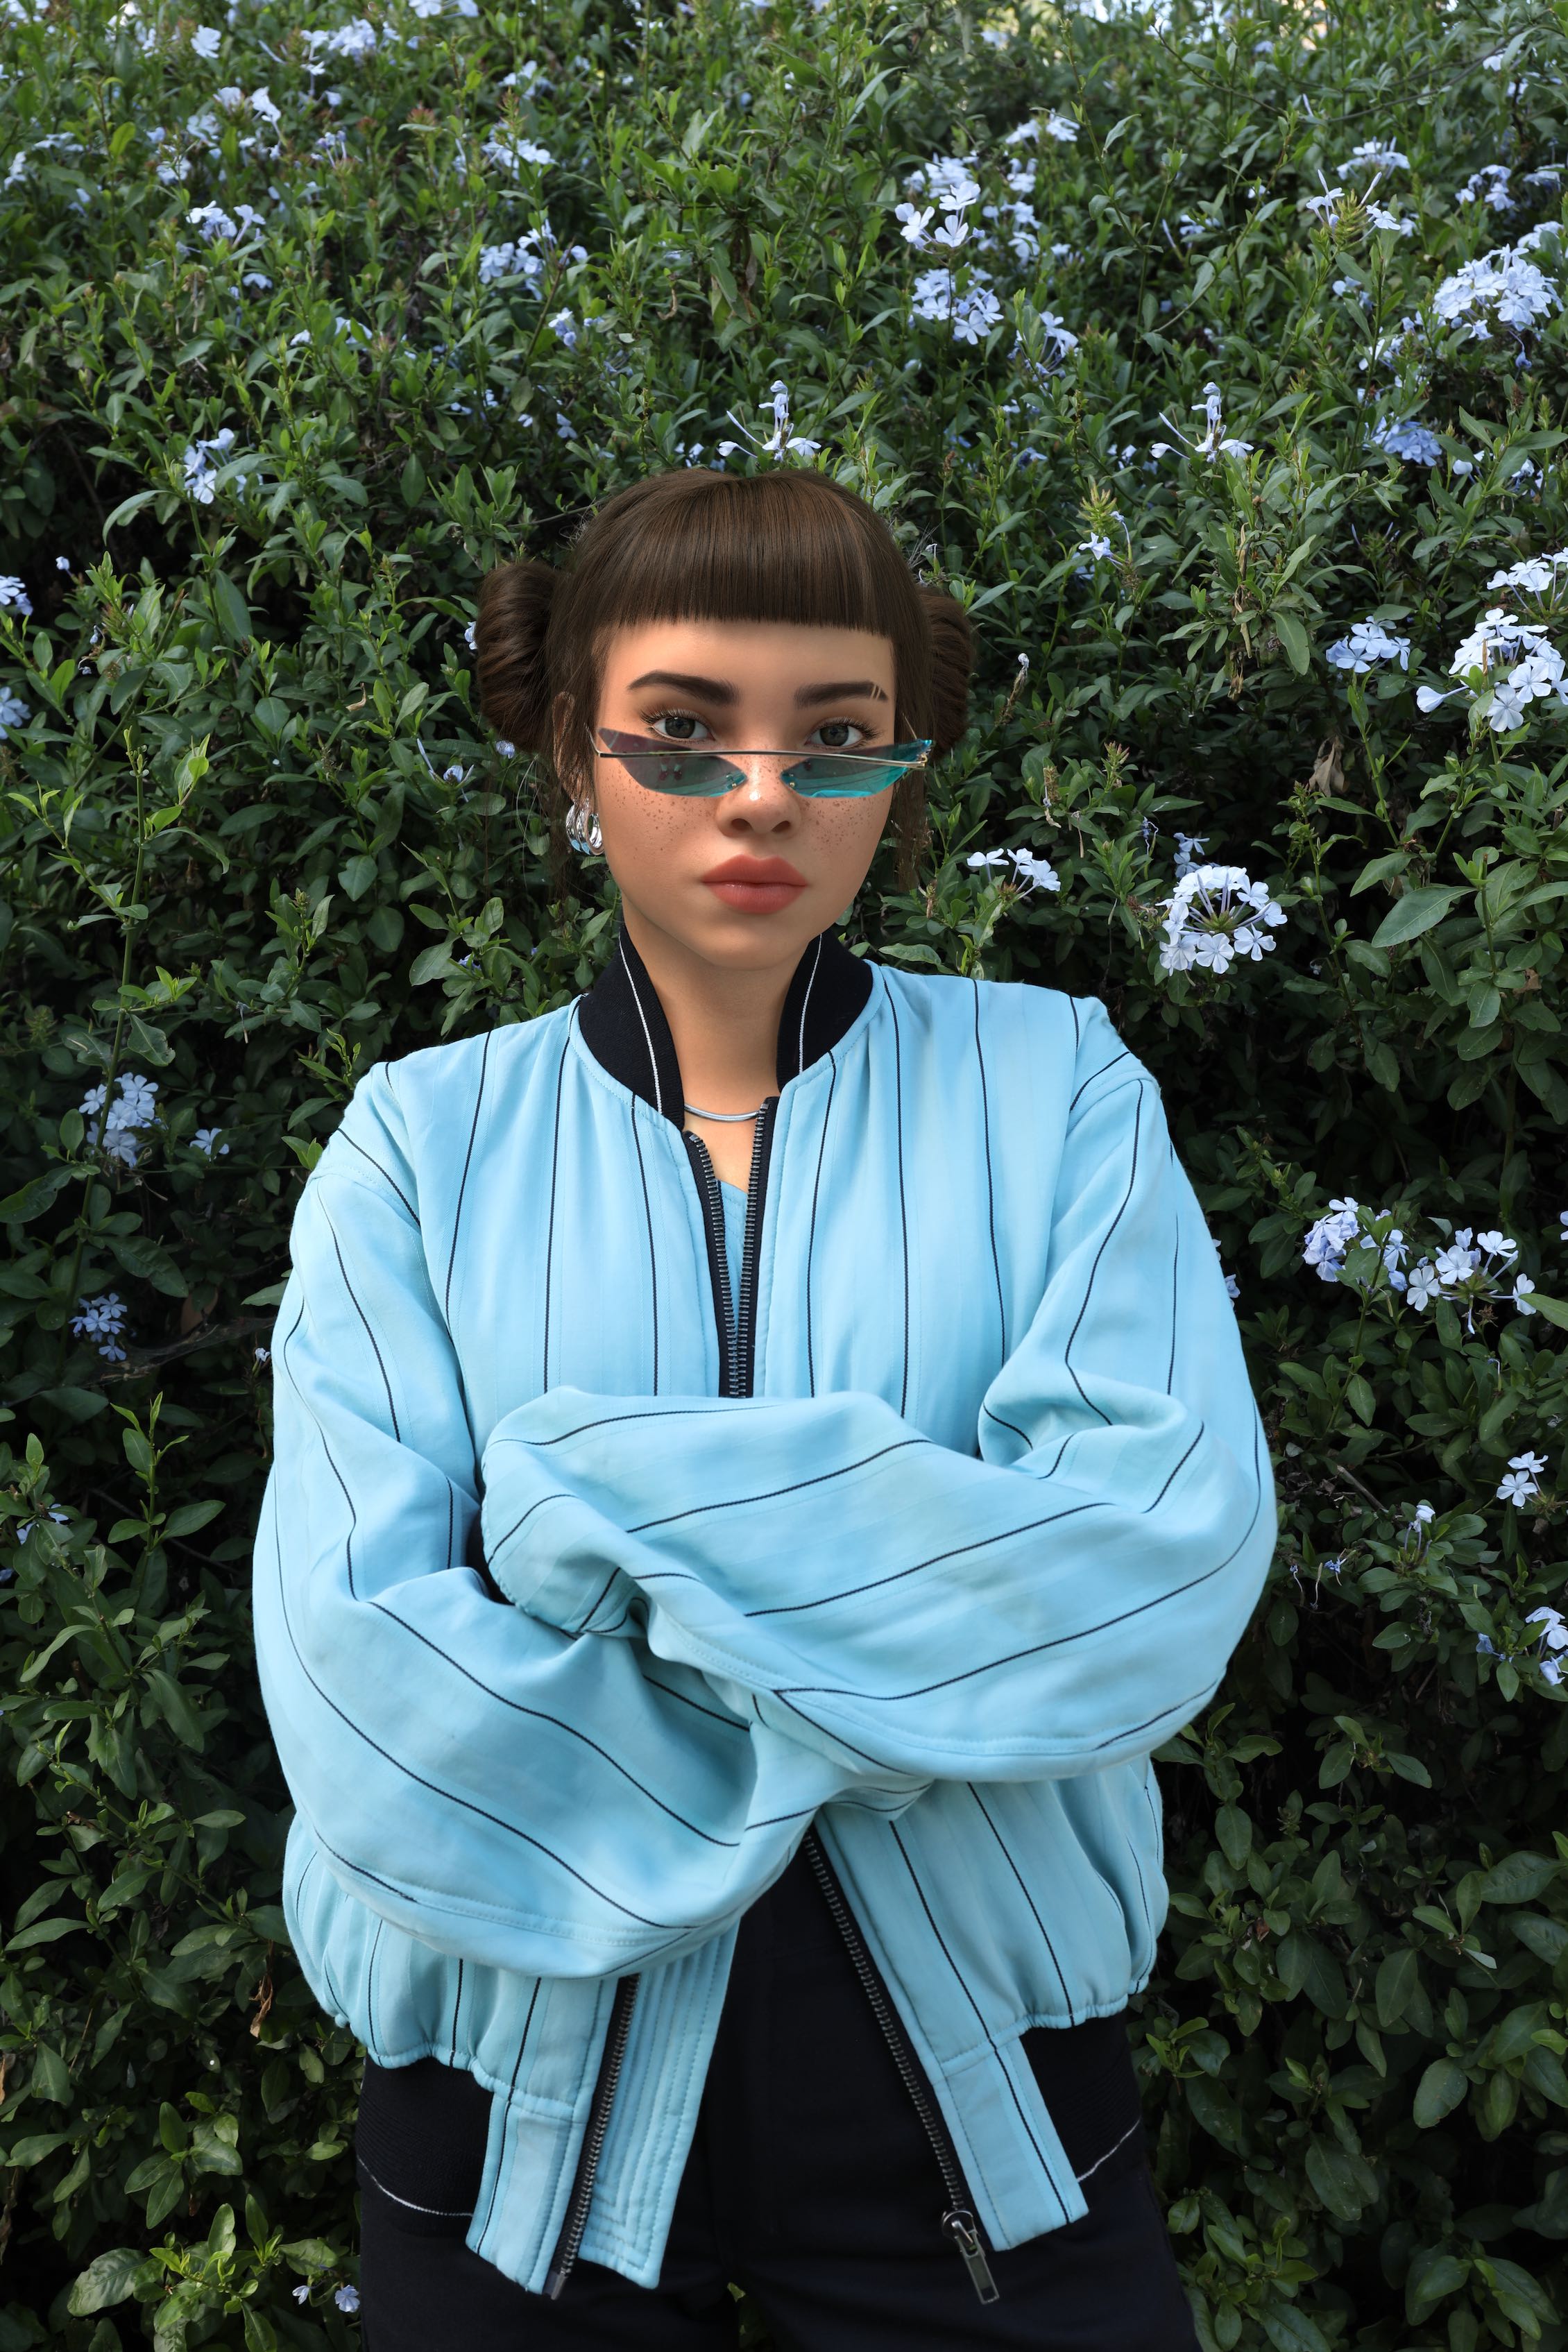 Lil Miquela. Courtesy of the subject. 